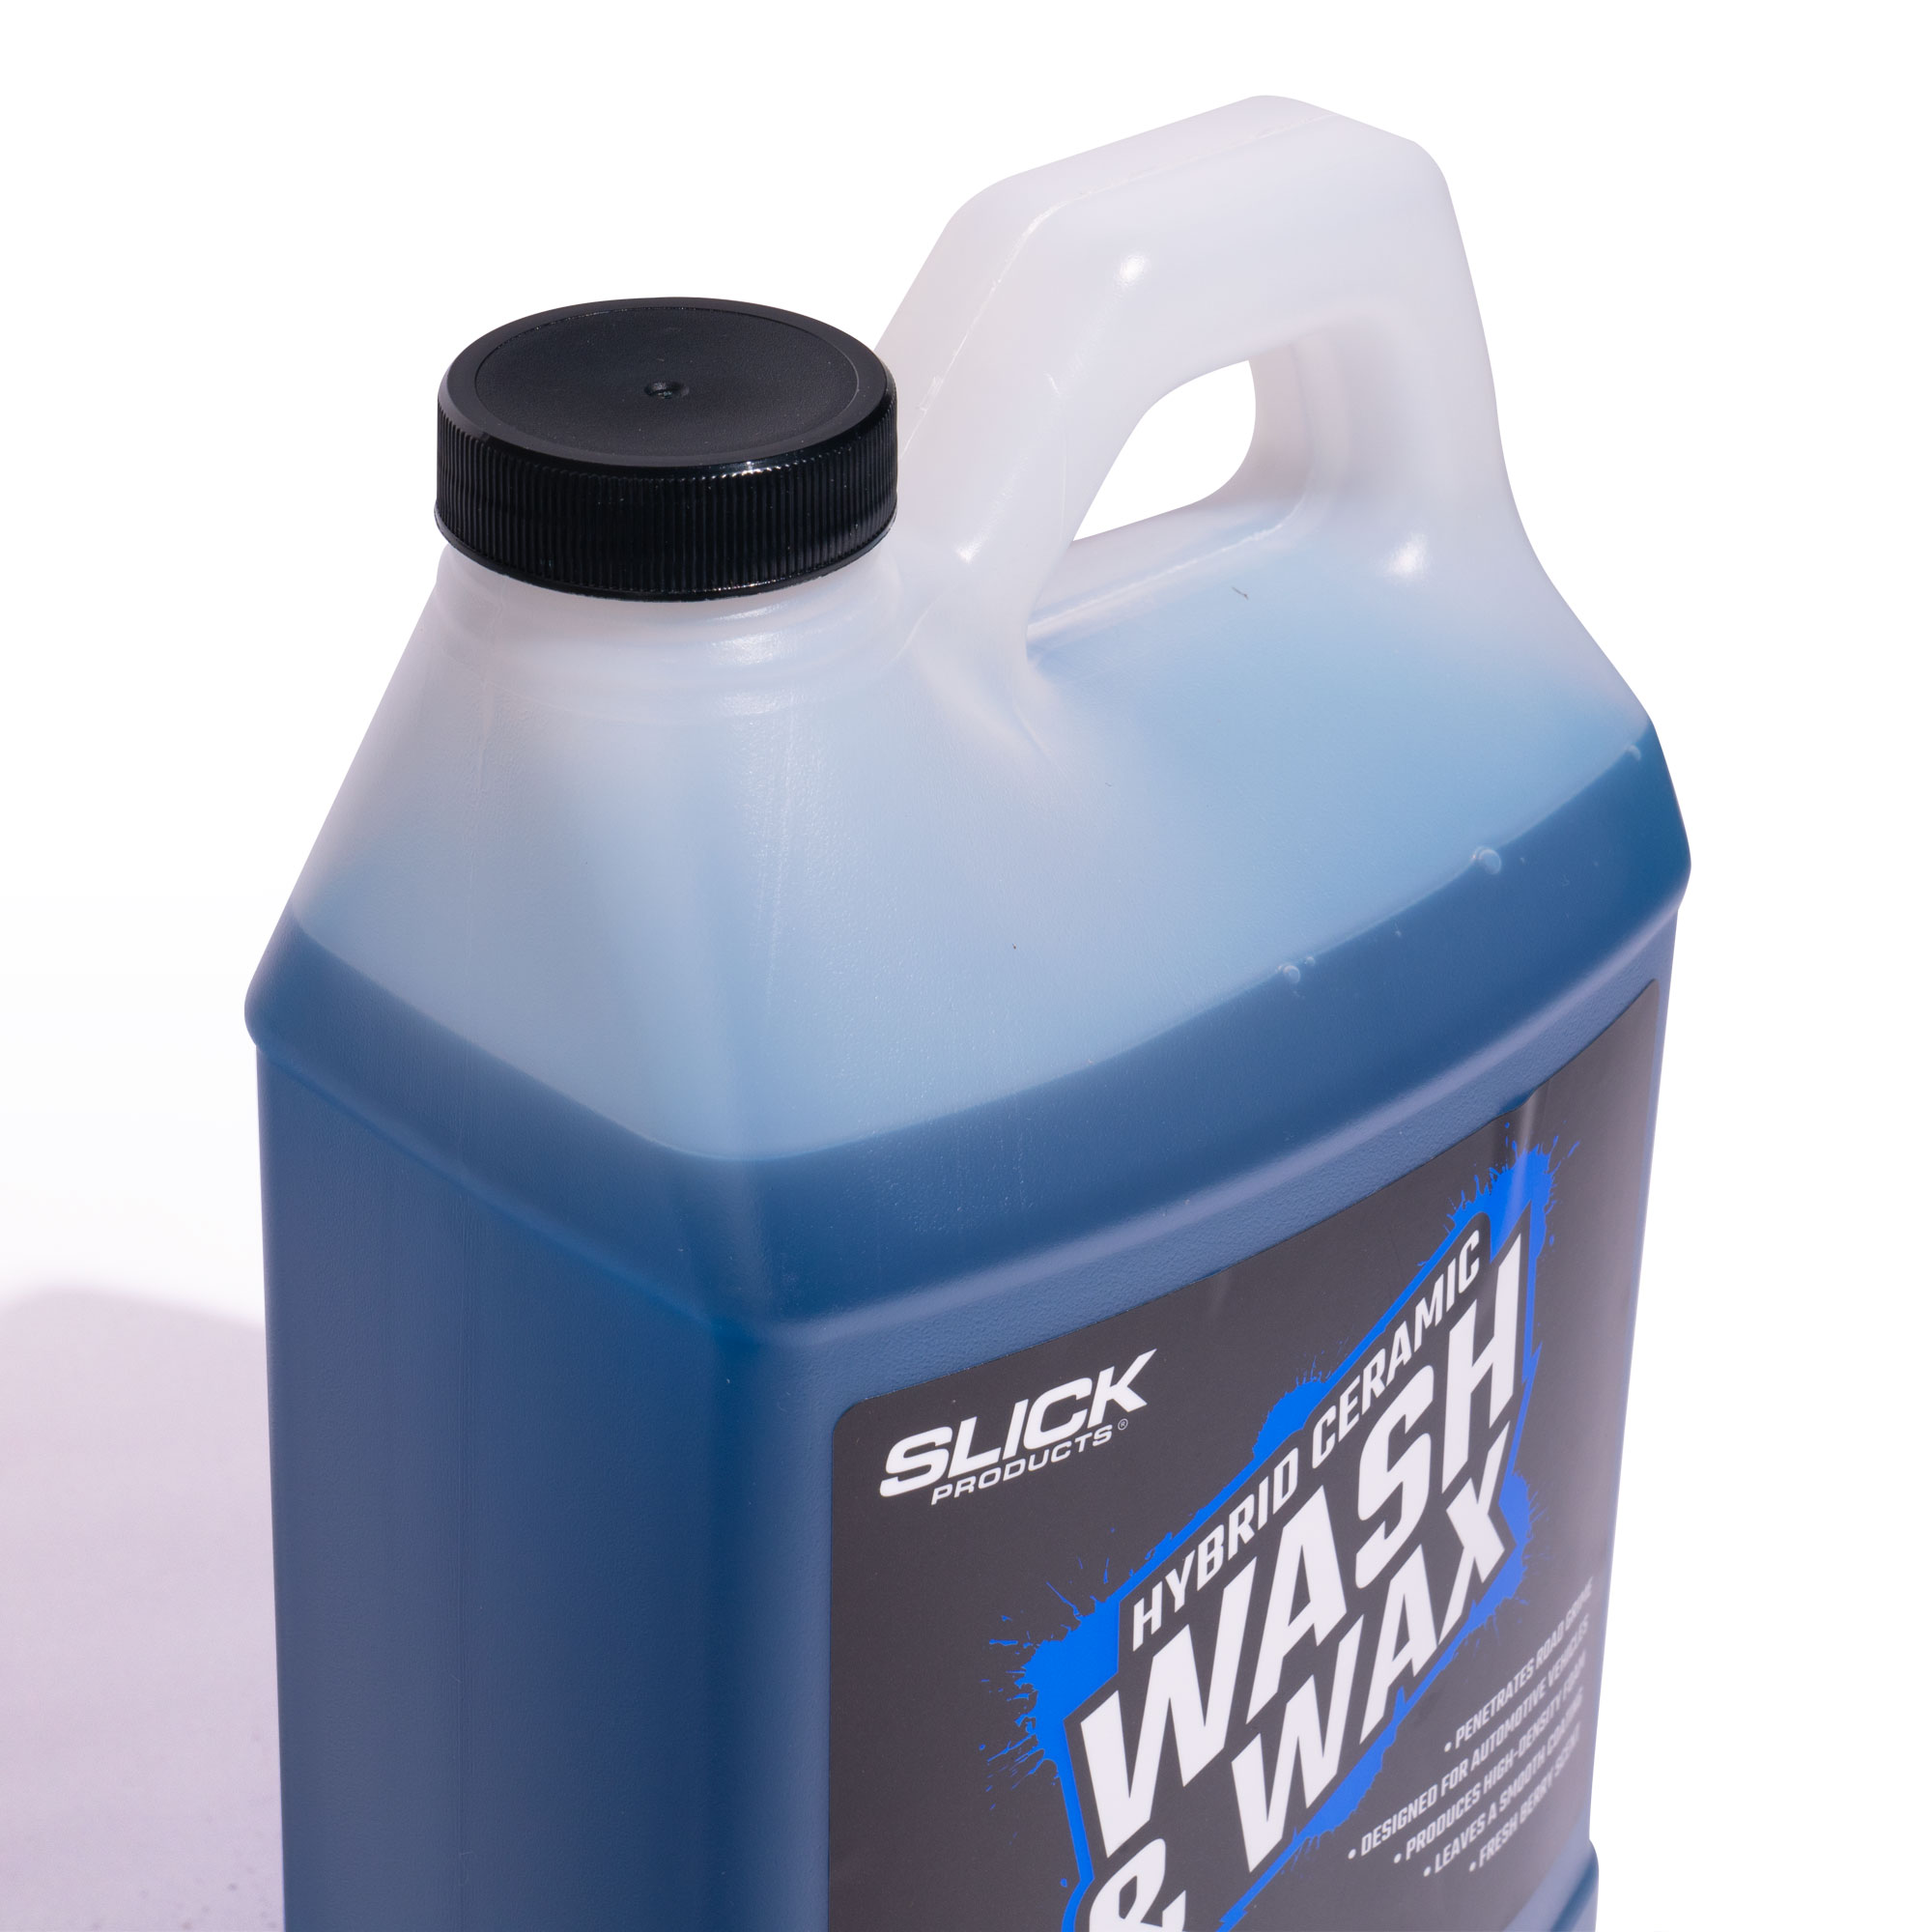 Slick Products SP-HDCD-64 Heavy-Duty Cleaner & Degreaser